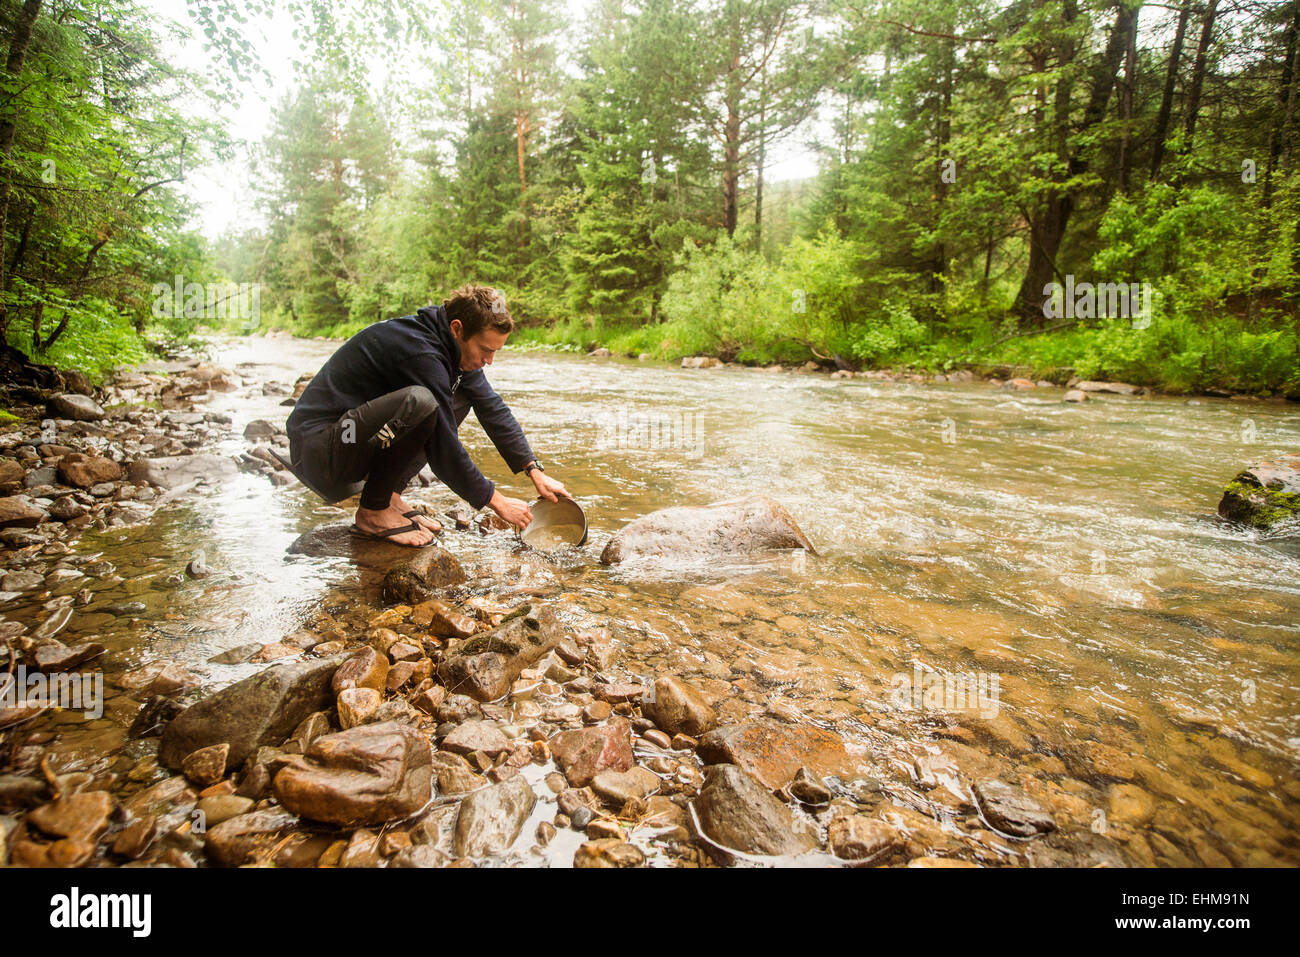 Caucasian man crouching in forest river Stock Photo